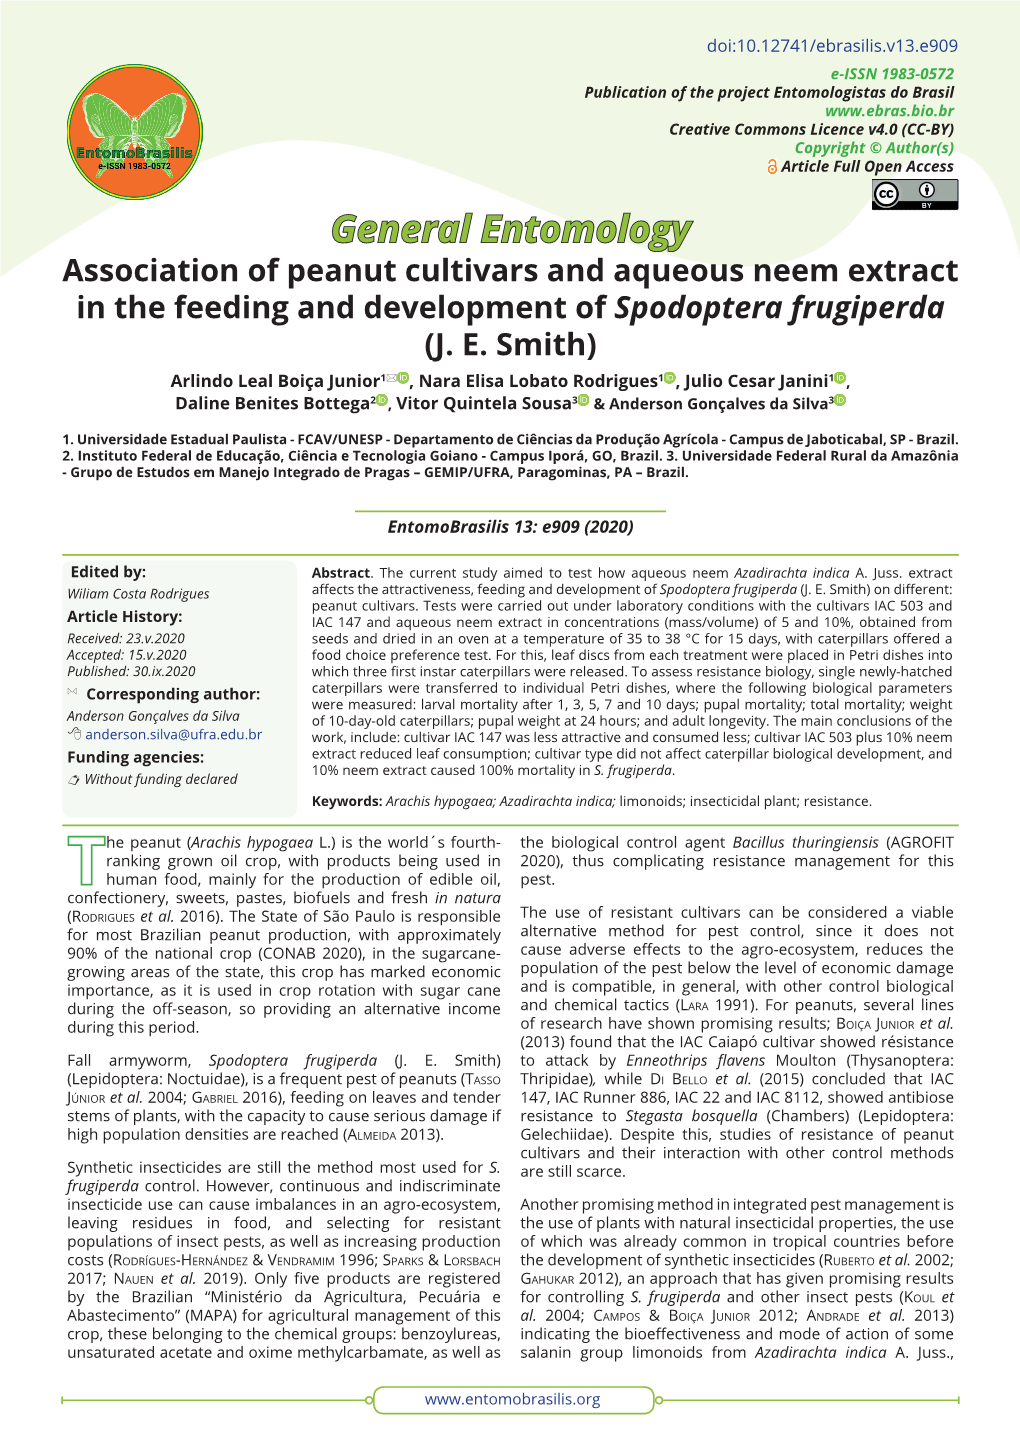 Association of Peanut Cultivars and Aqueous Neem Extract in the Feeding and Development of Spodoptera Frugiperda (J